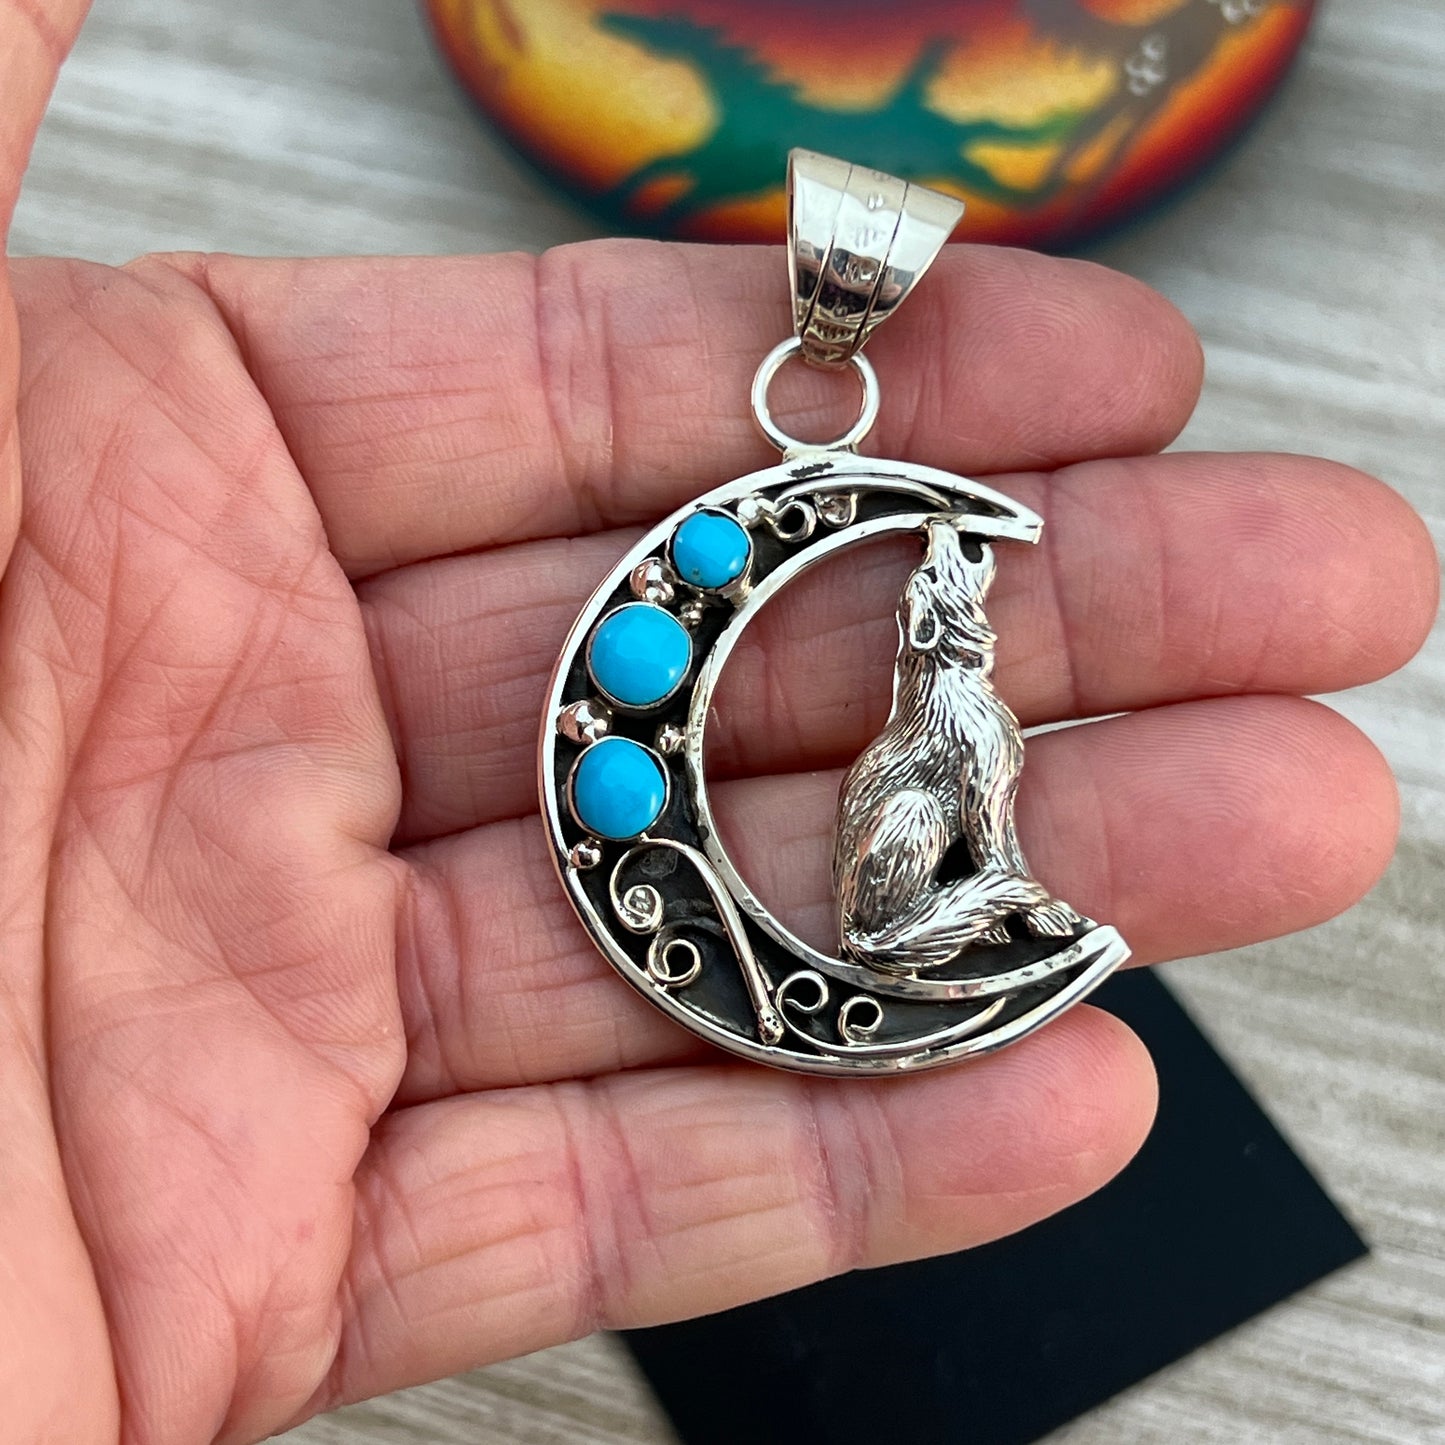 Howling Wolf Coyote moon pendant #3, Campitos turquoise, sterling silver,  Navajo handmade, Jennifer Cayaditto, signed, men women